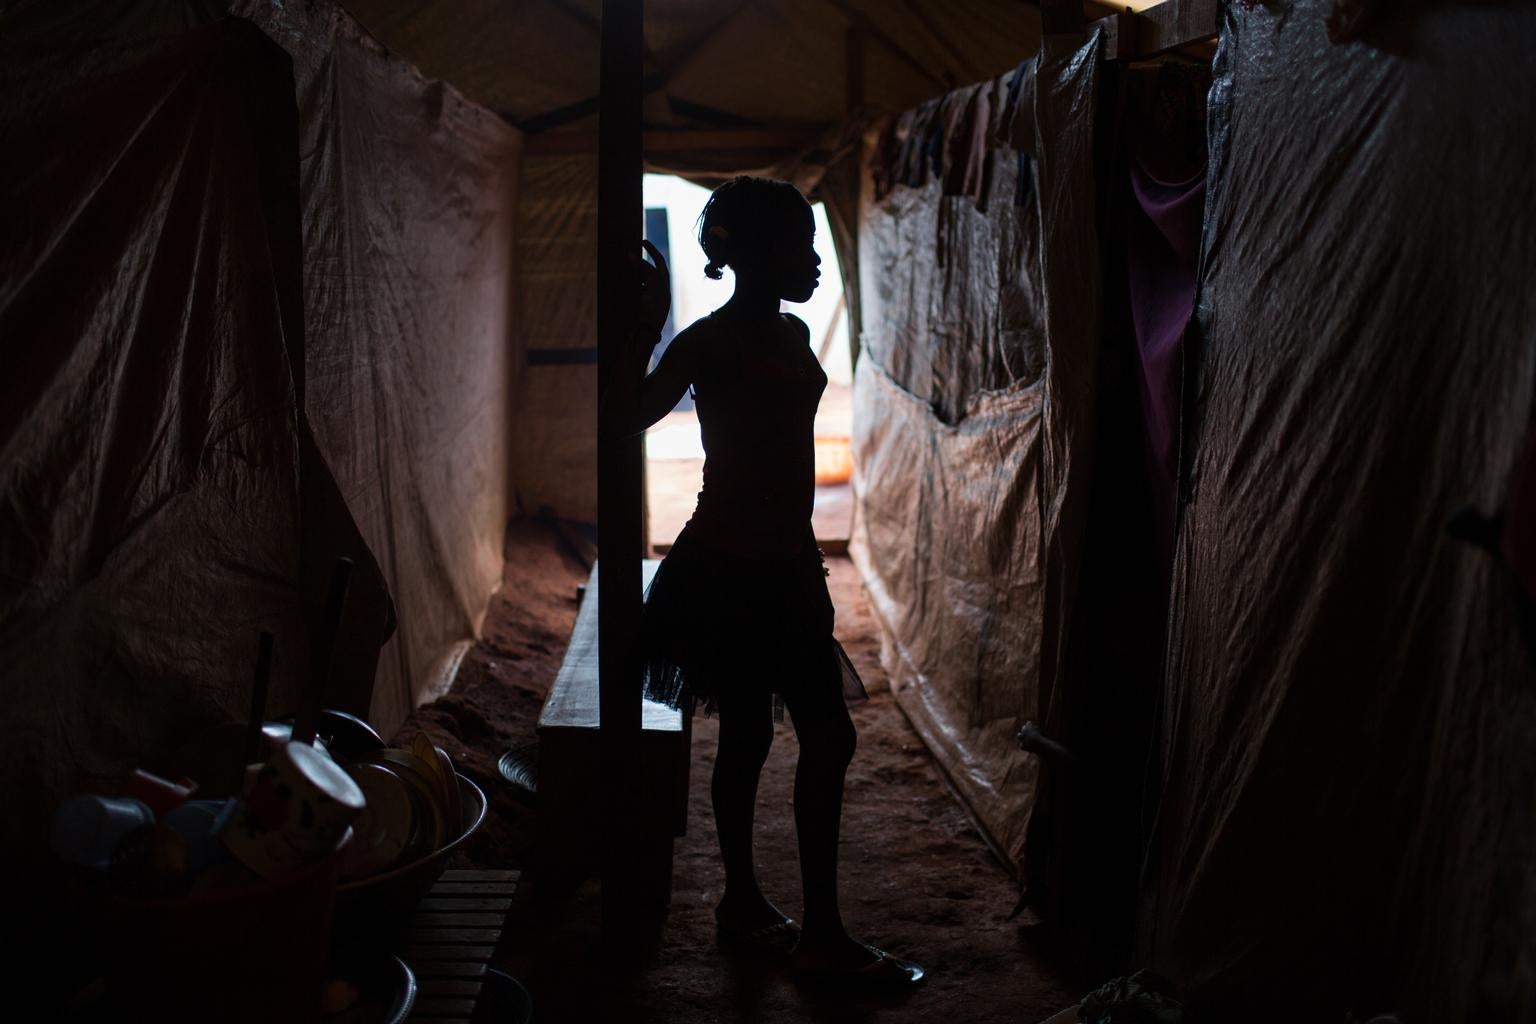 On 23 June 2015 in the Central African Republic, Alison, 14, stands beneath a makeshift shelter